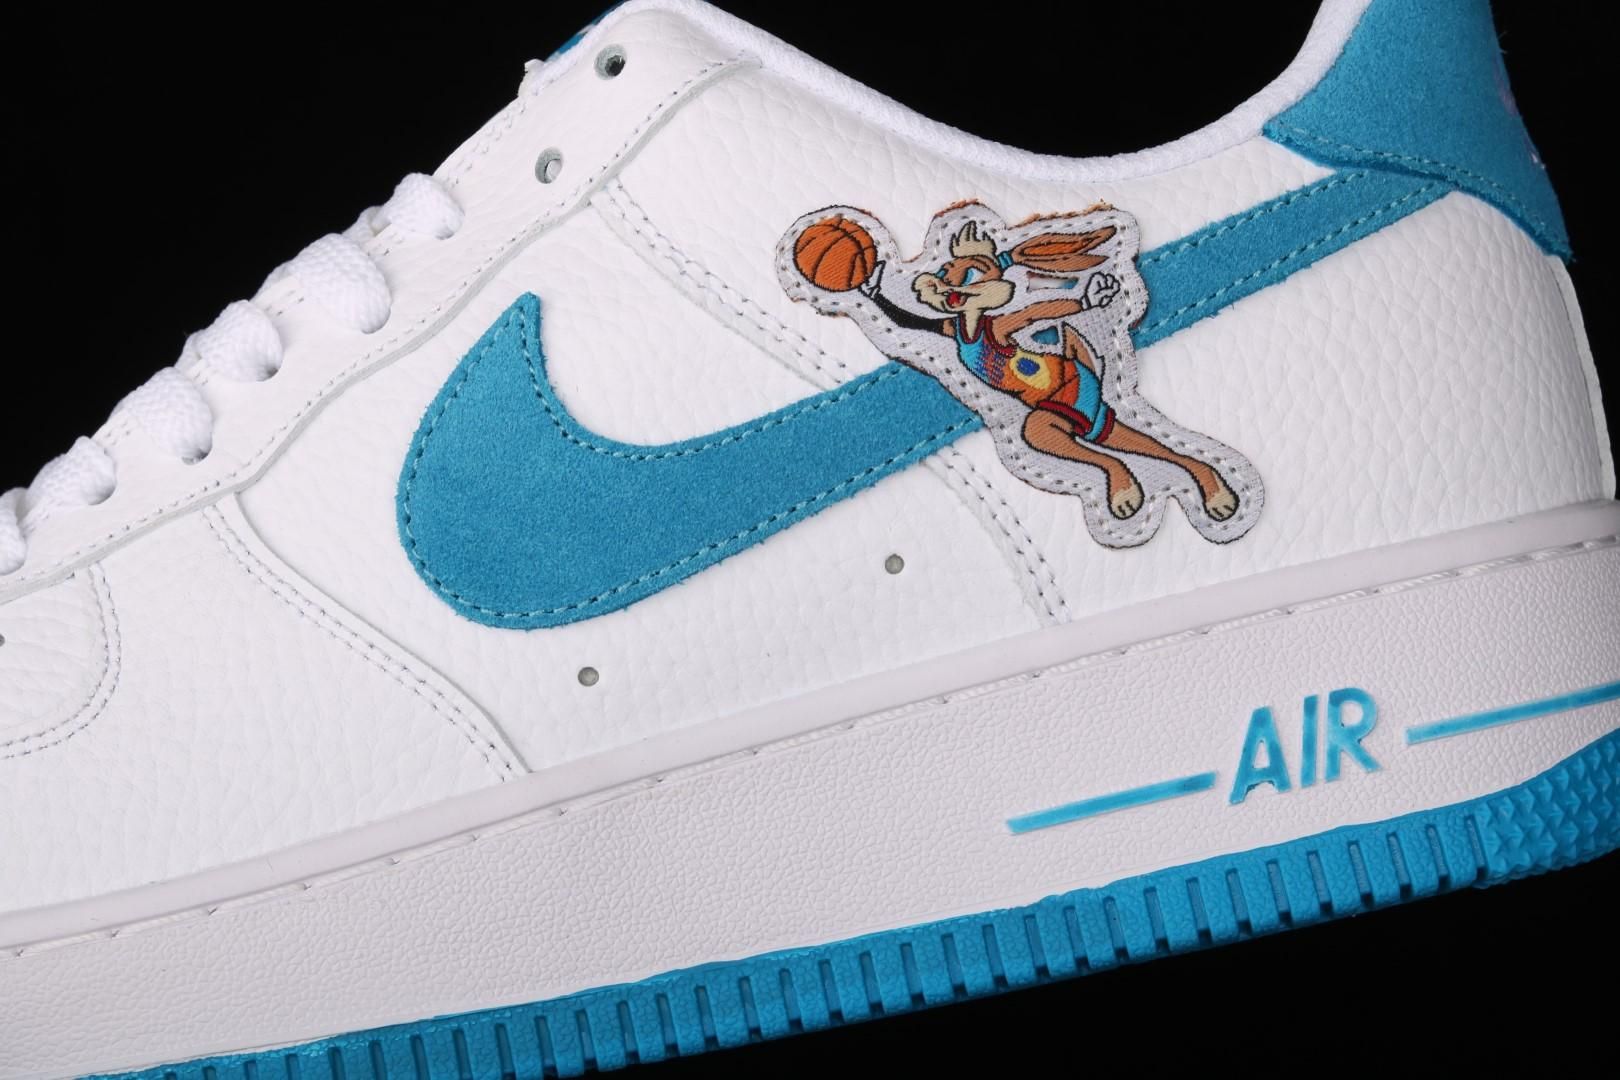 NikeWMNS Air Force 1 AF1 Low - Hare Space Jam